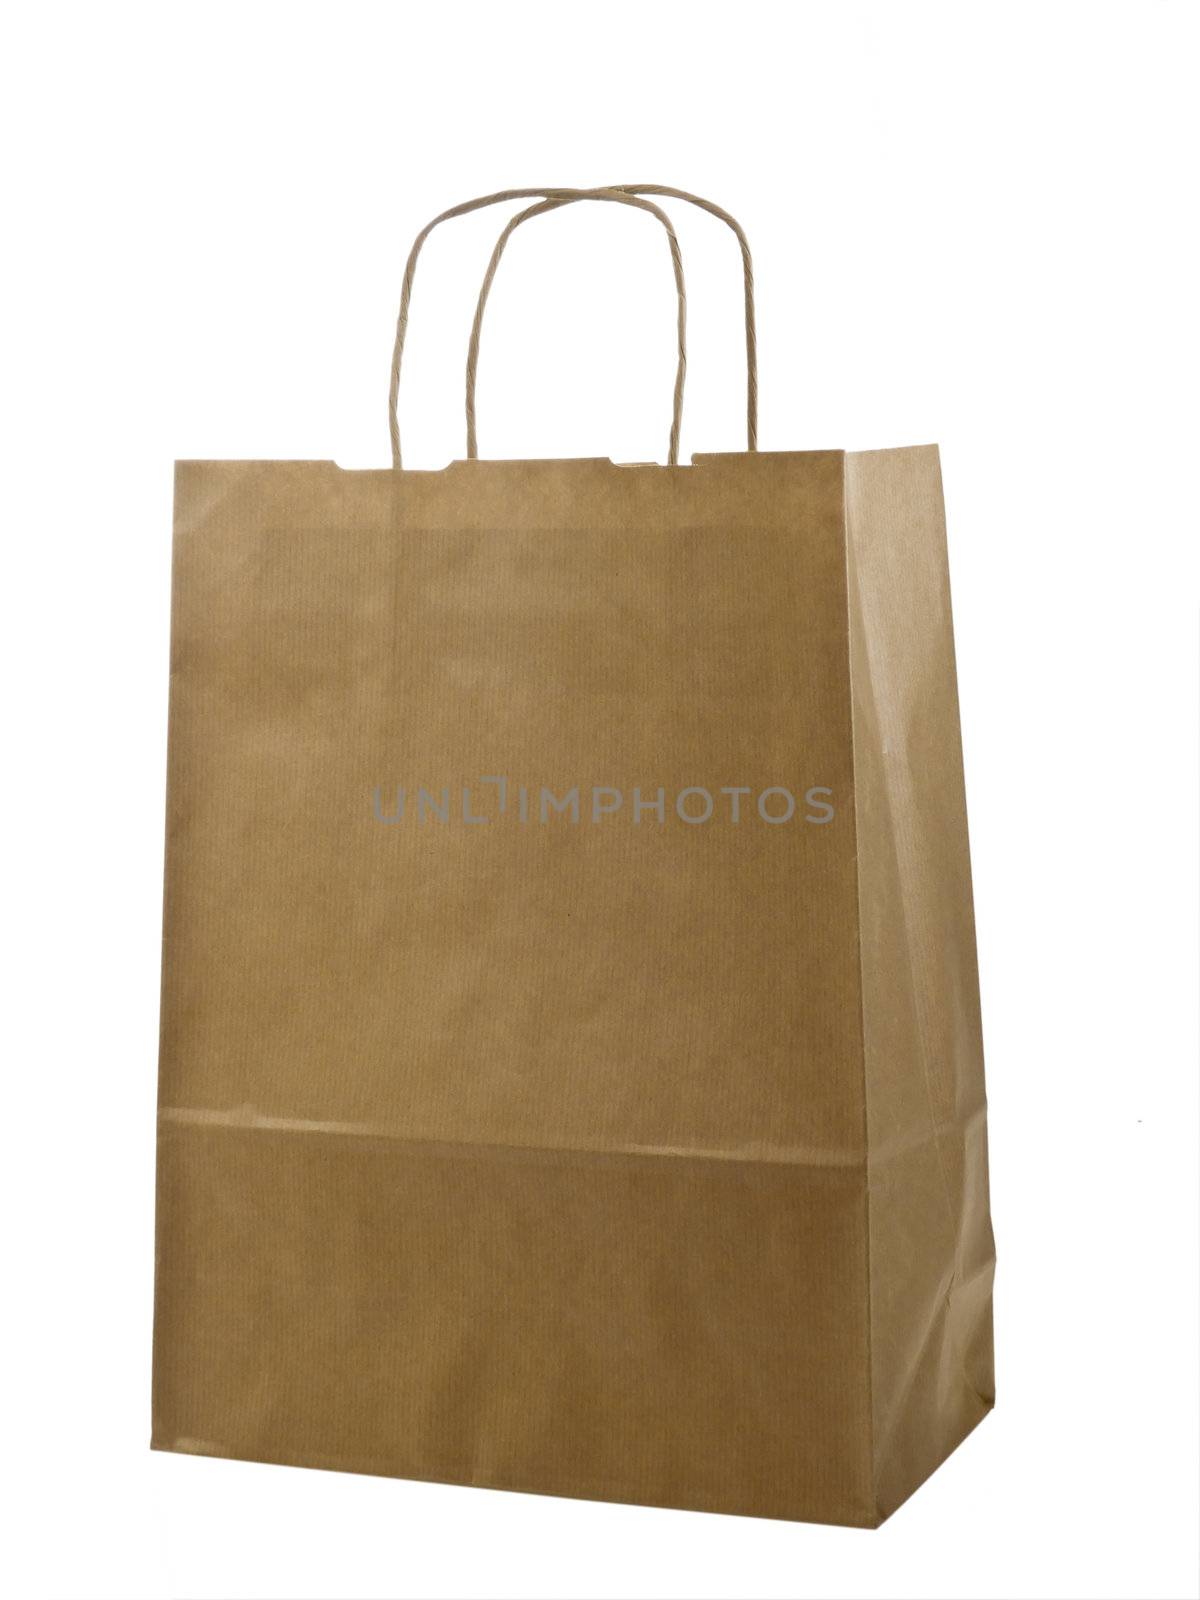 Brown paper bag on white background